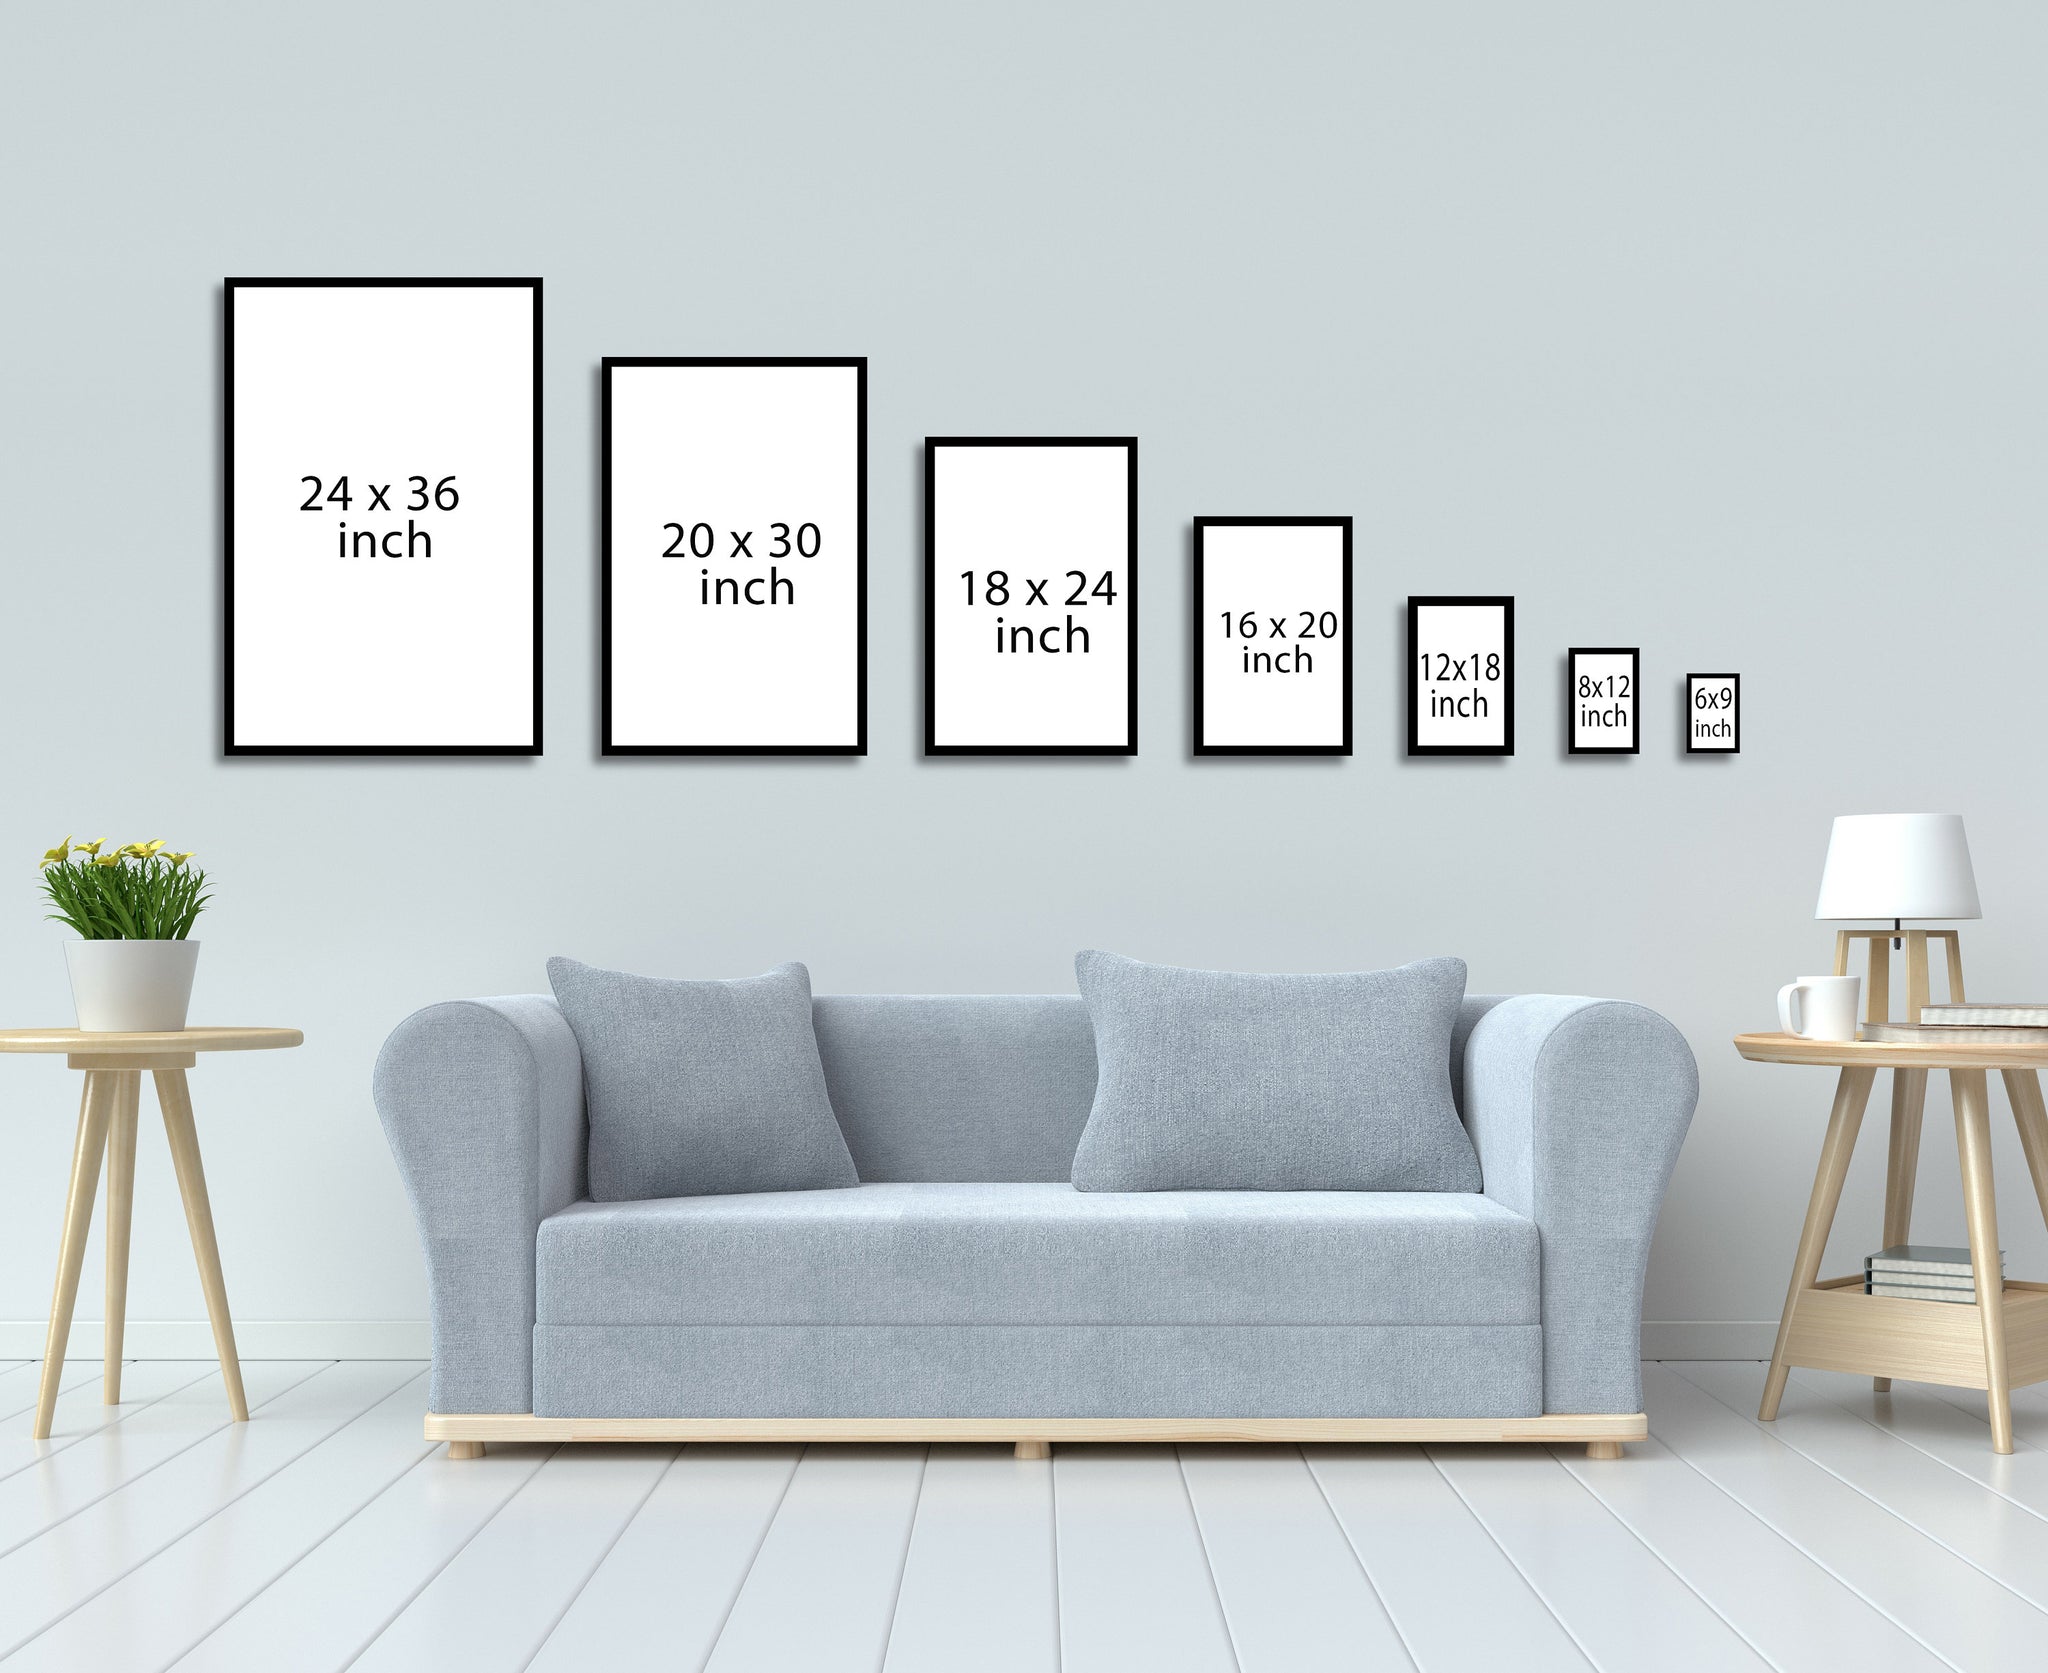 Gym wall art, Gym Poster, Gym quote, Home wall art, Home gym, Home gym decor, Home gym poster, Inspired poster, Fitness decor, Motivational